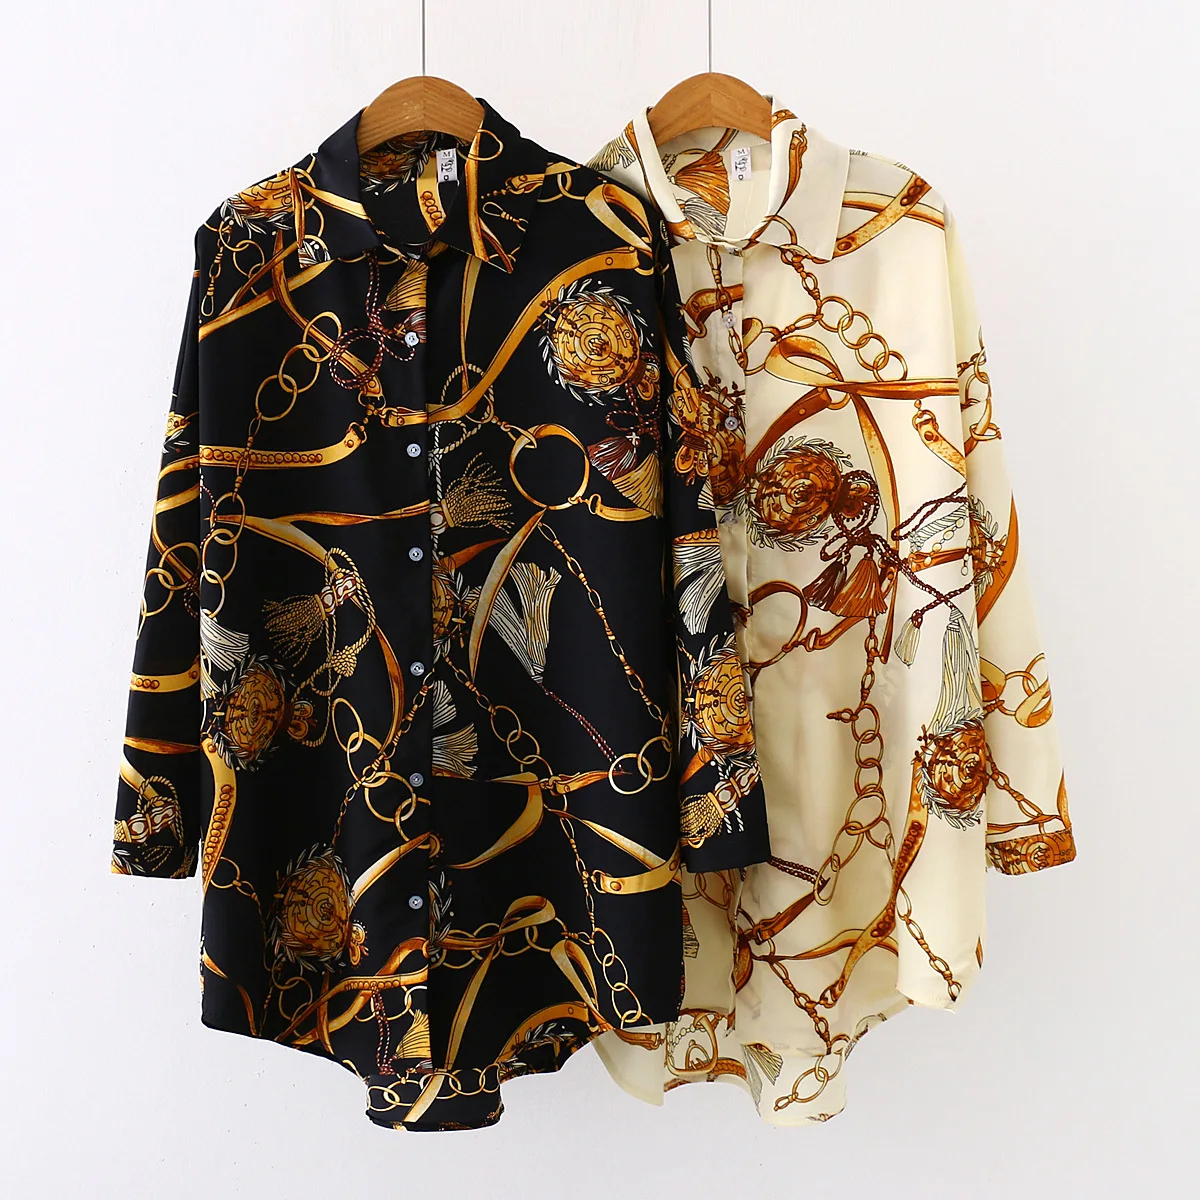 

Spring and summer women lapel Large size chiffon shirt fashion chain print shirt Casual Spliced Asymmetrical long sleeve blouses, Black, apricot&customized color